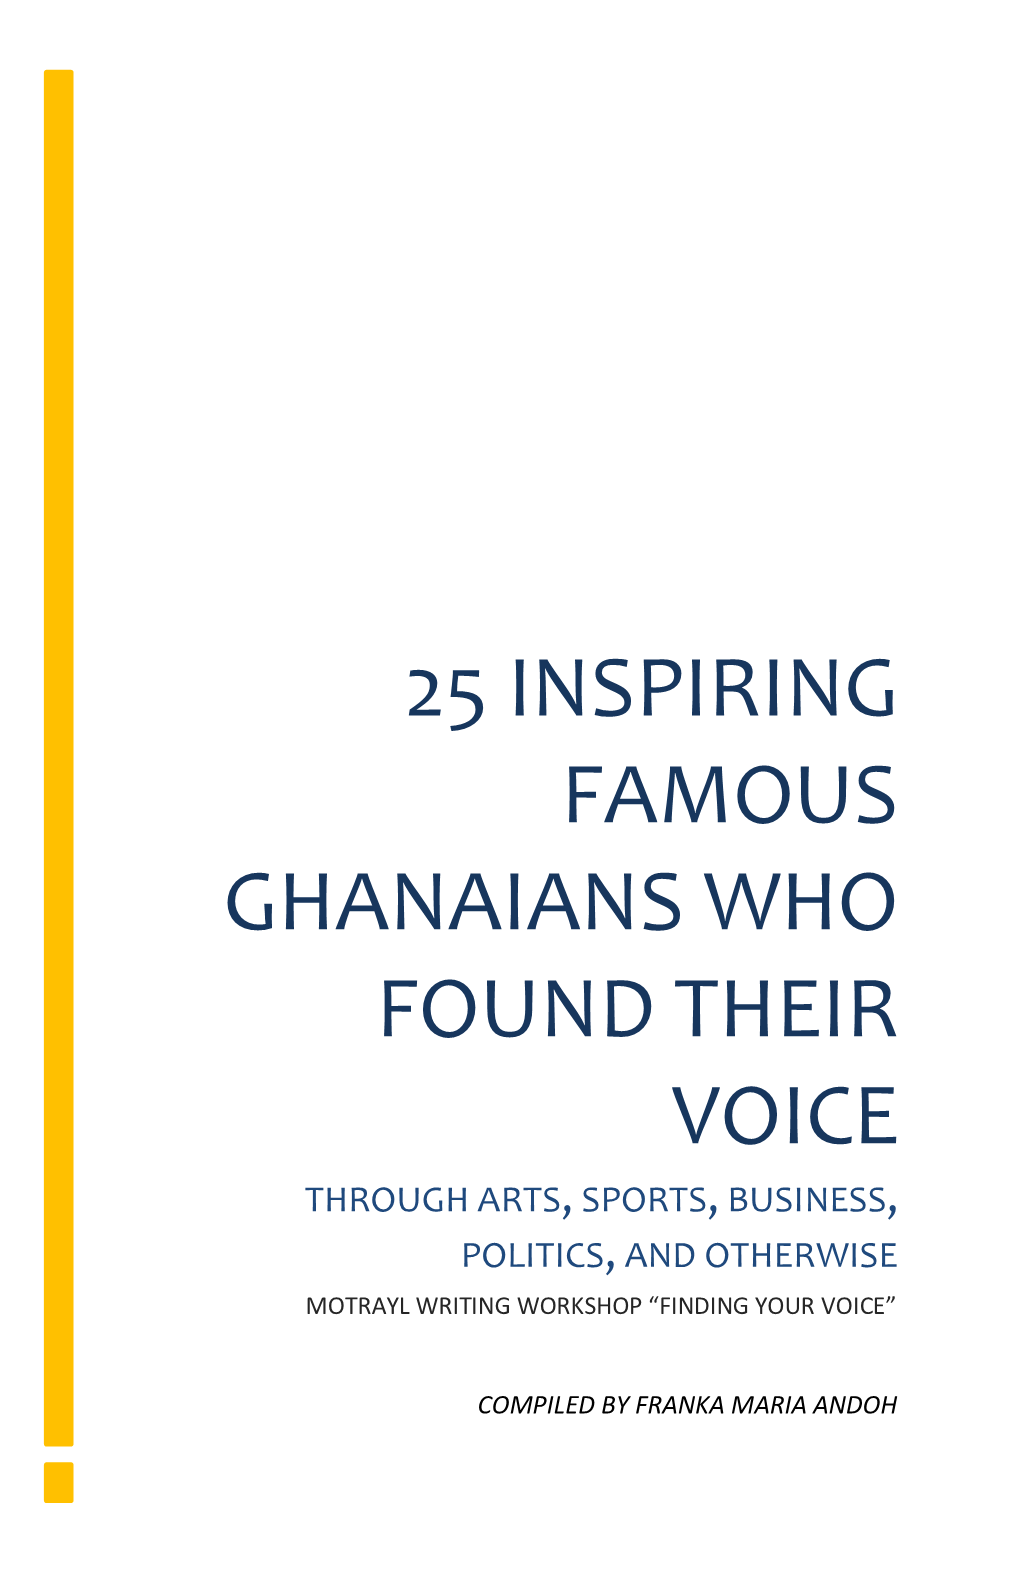 25 Inspiring Famous Ghanaians Who Found Their Voice Through Arts, Sports, Business, Politics, and Otherwise Motrayl Writing Workshop “Finding Your Voice”